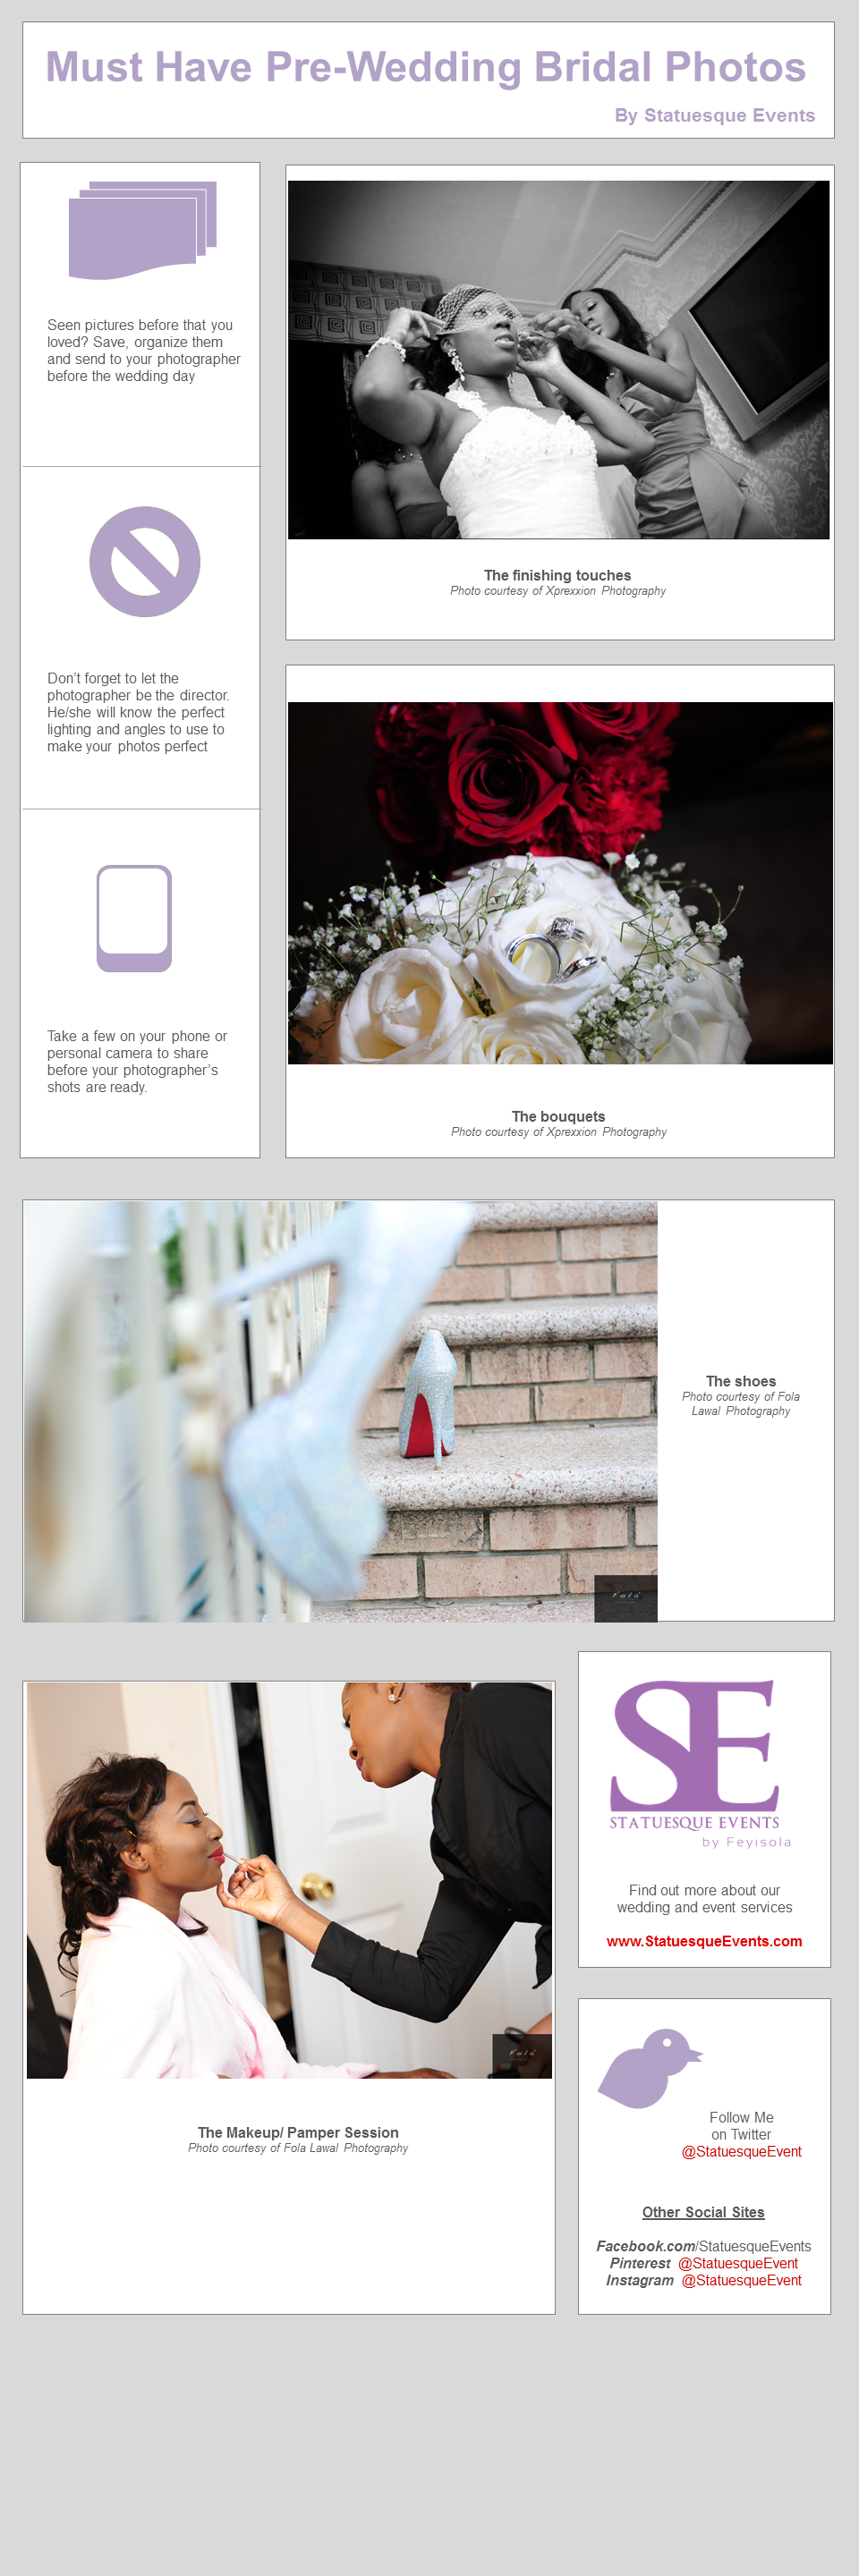 wedding bridal photo fola lawal xprexxion infographic must have